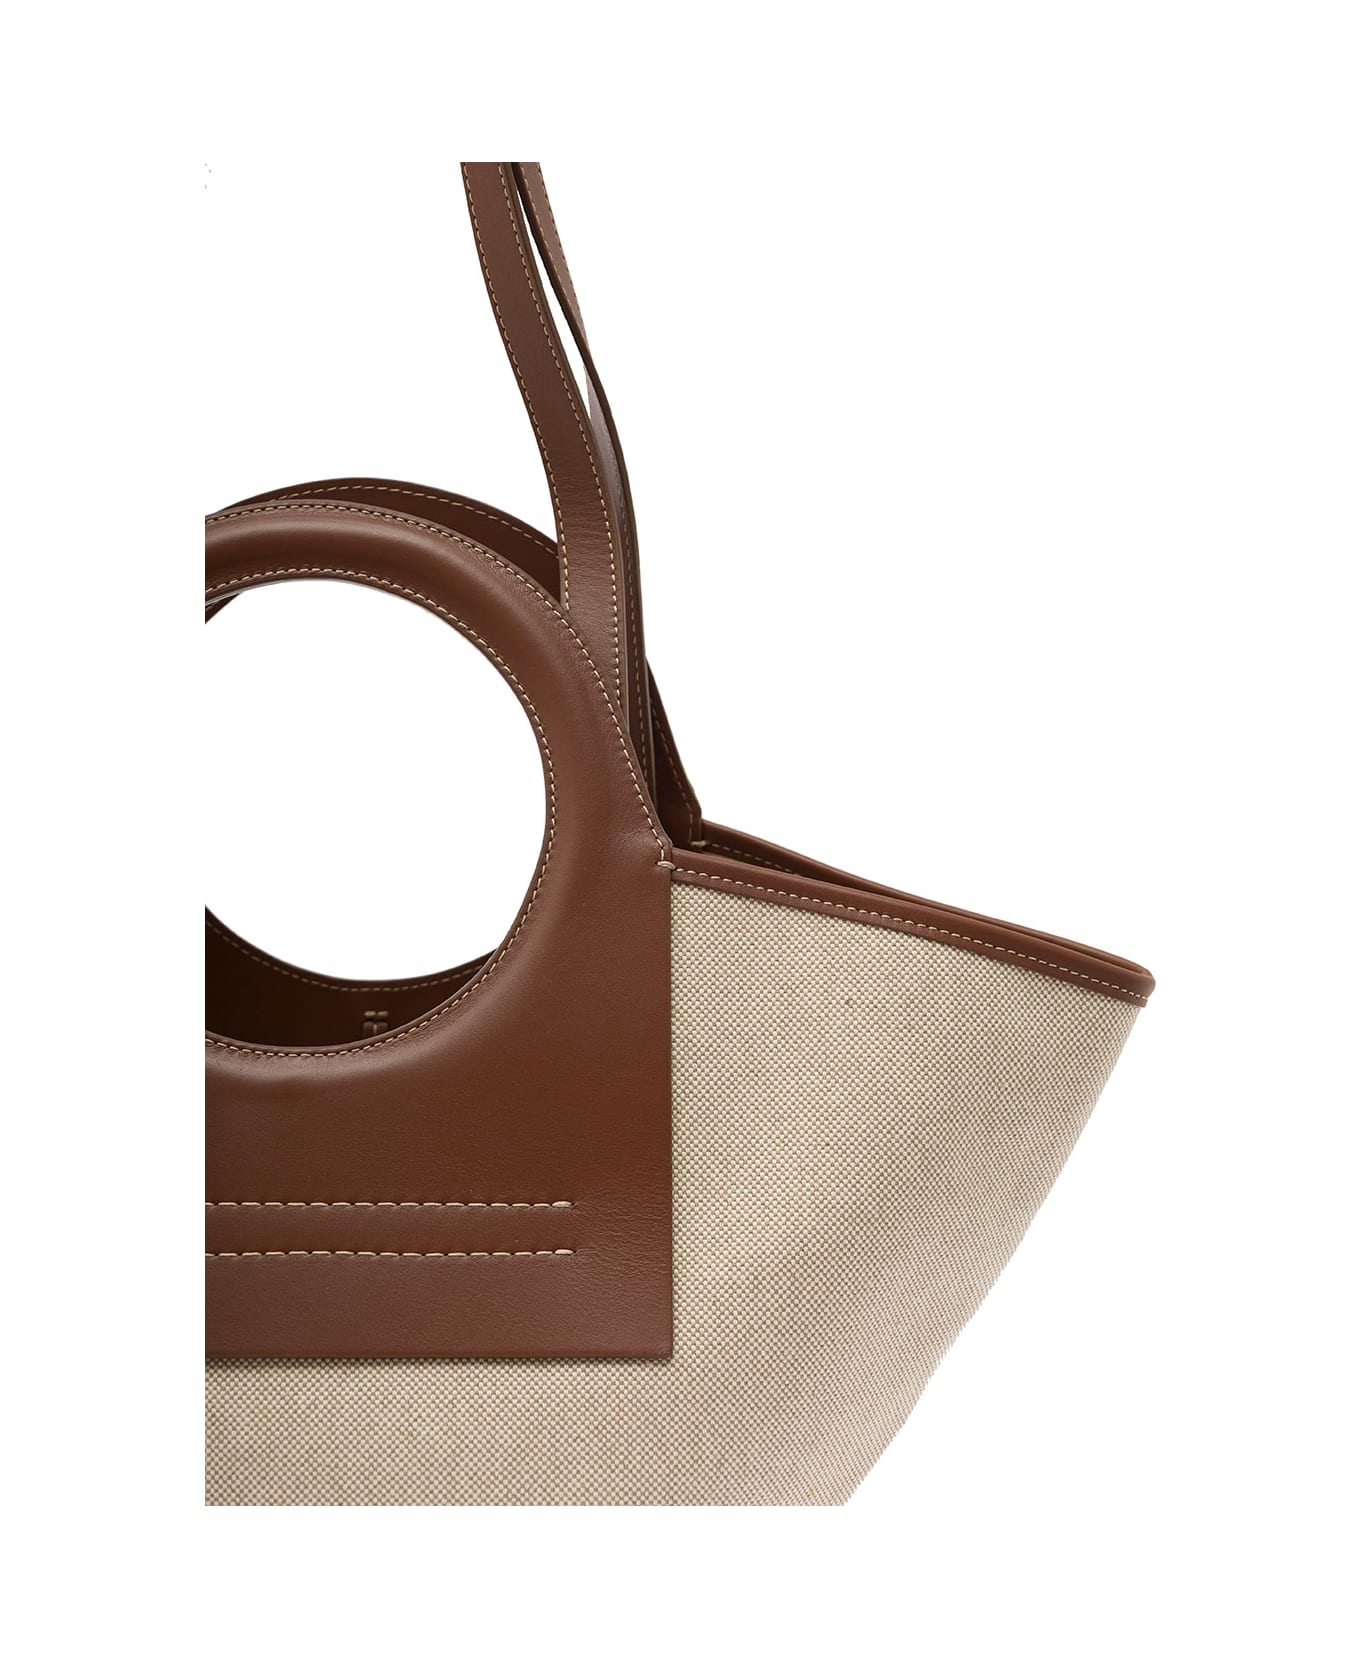 Hereu 'cala S' White And Brown Handbag With Leather Handles In Canvas Woman - Beige